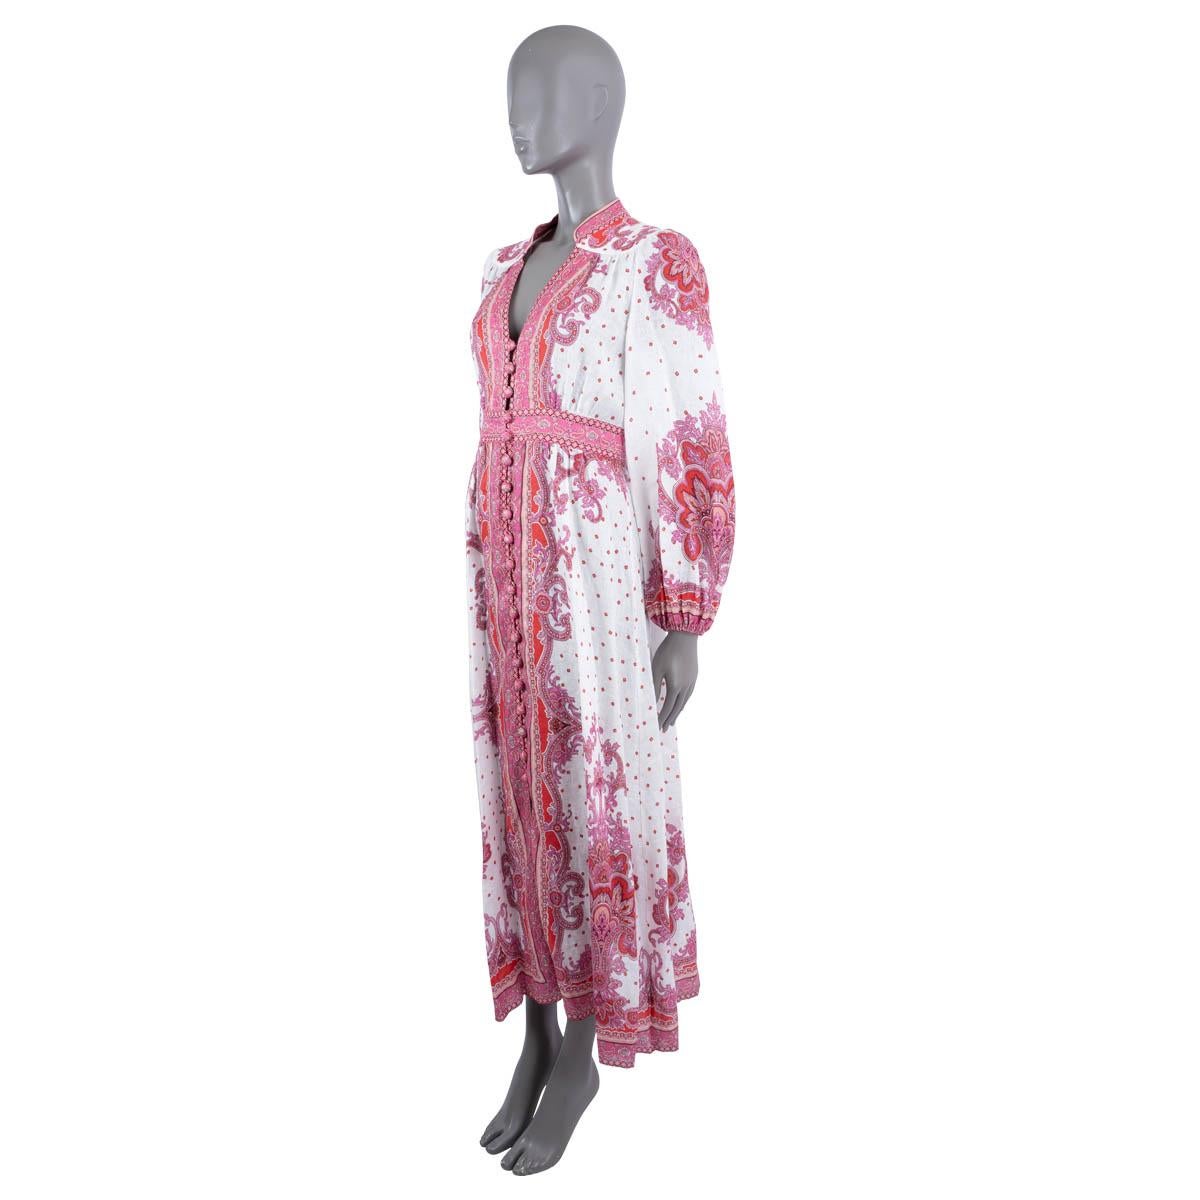 100% authentic Zimmermann Bells maxi dress in white, red and pink paisley printed linen (100%) - please note the content tag is missing. Features a V-neck with band collar, button front with high-slit and elastic cuffs. Opens with a conclealed